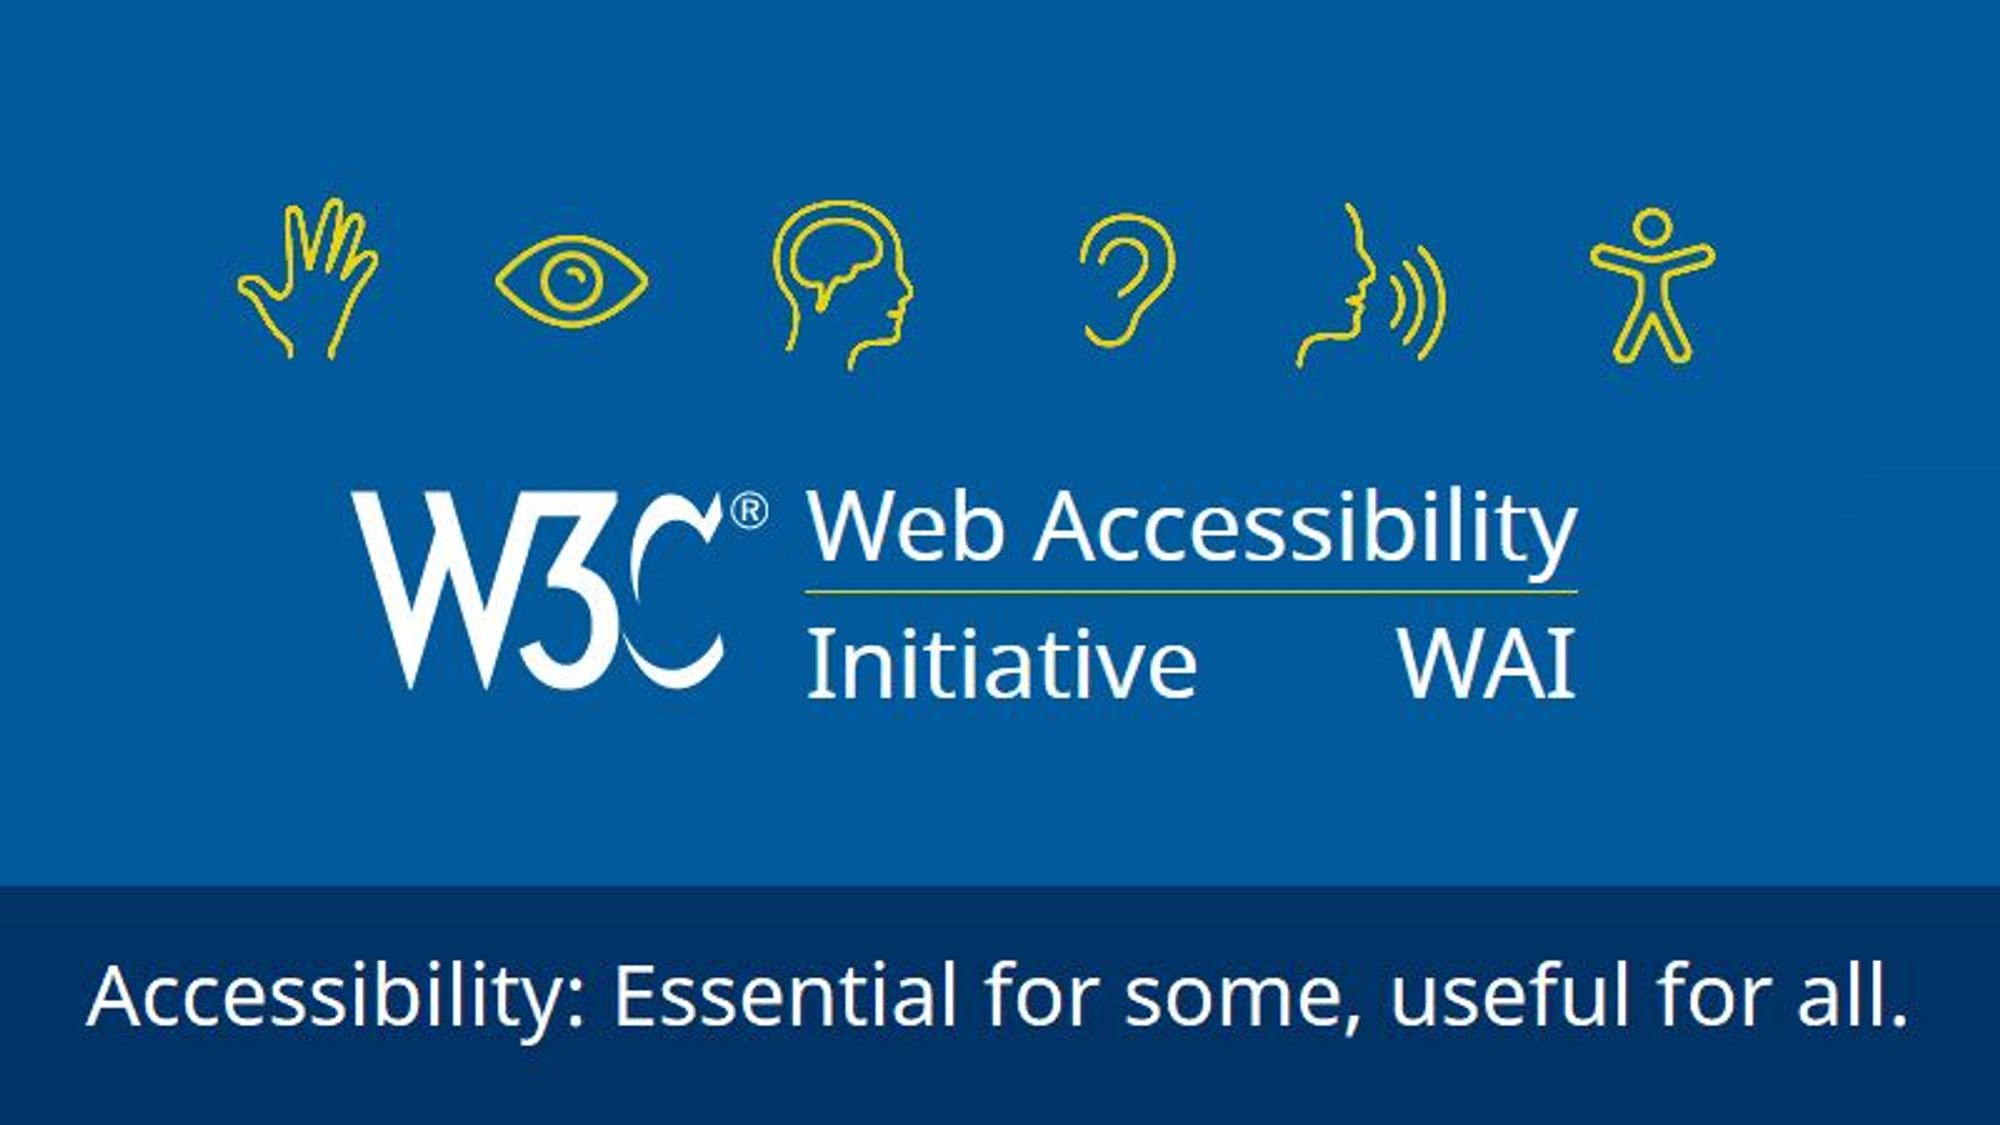 W3C Accessibility Standards Overview